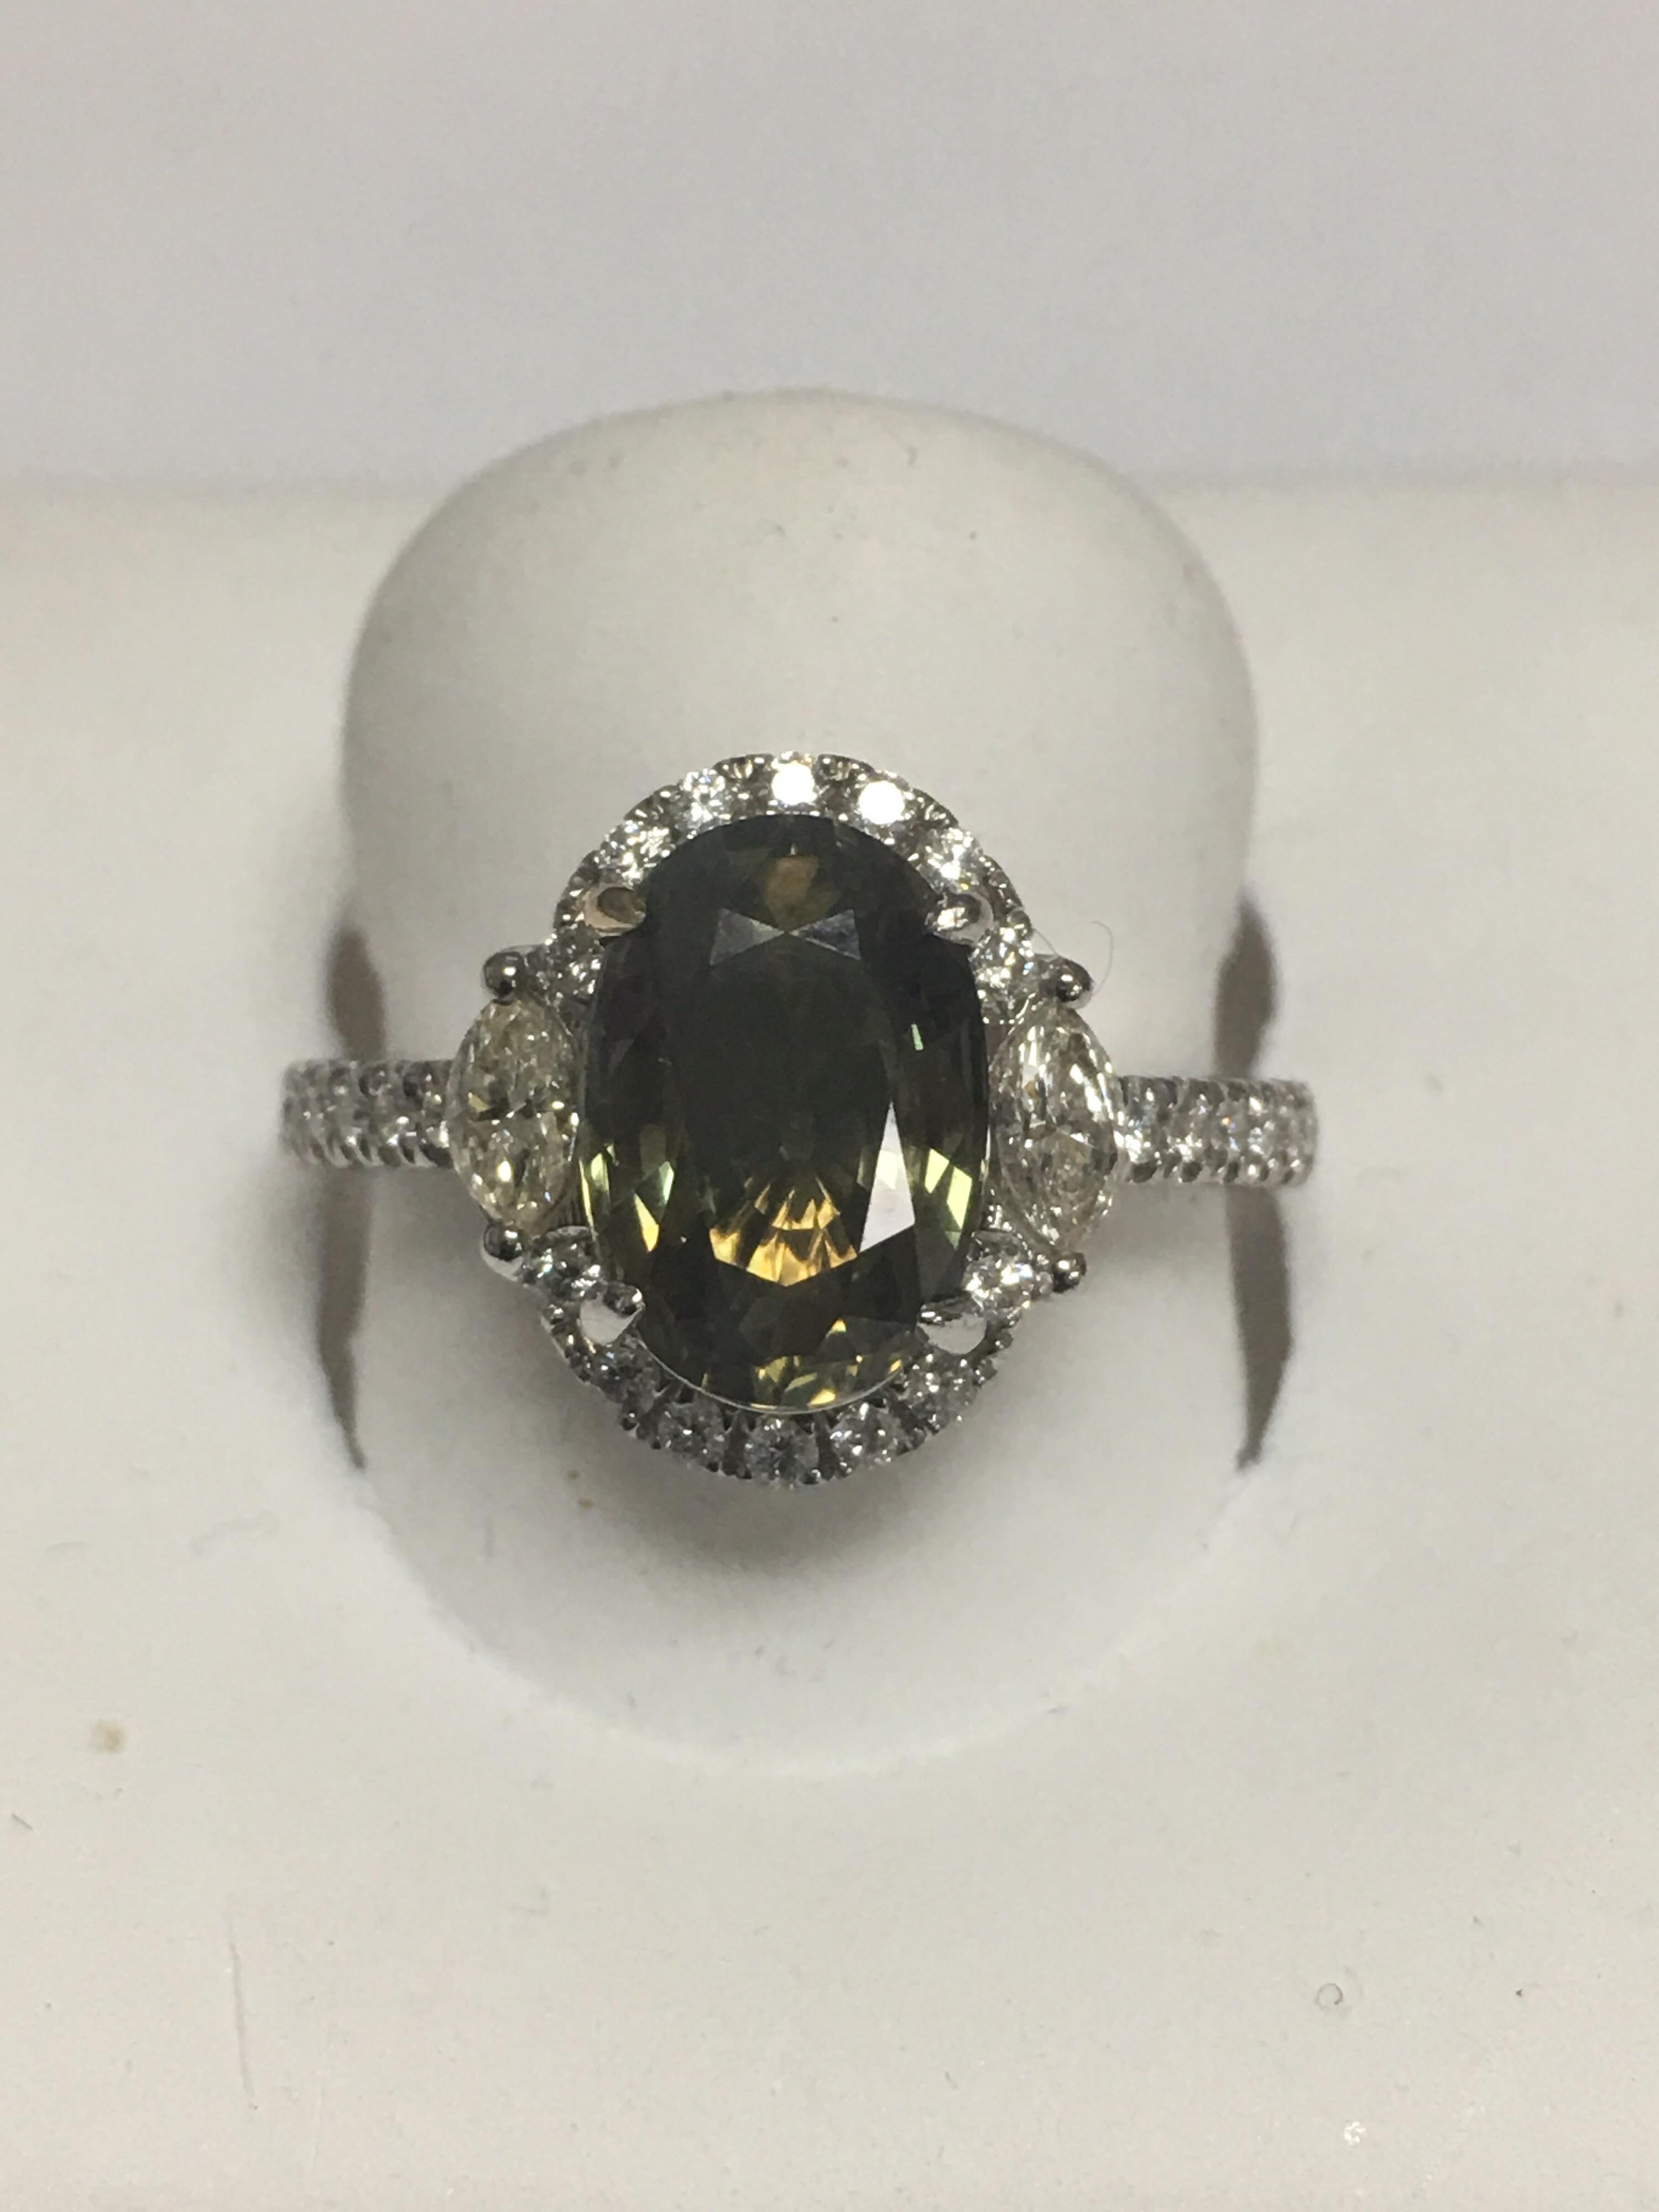 GIA Certified 3.35 Carat Alexandrite and 0.57 Carat White diamond set in 18 Karat White Gold.The Ring is one of a kind handcrafted by skilled craftsman.Size of the Ring is 7 and can be resized if needed. 